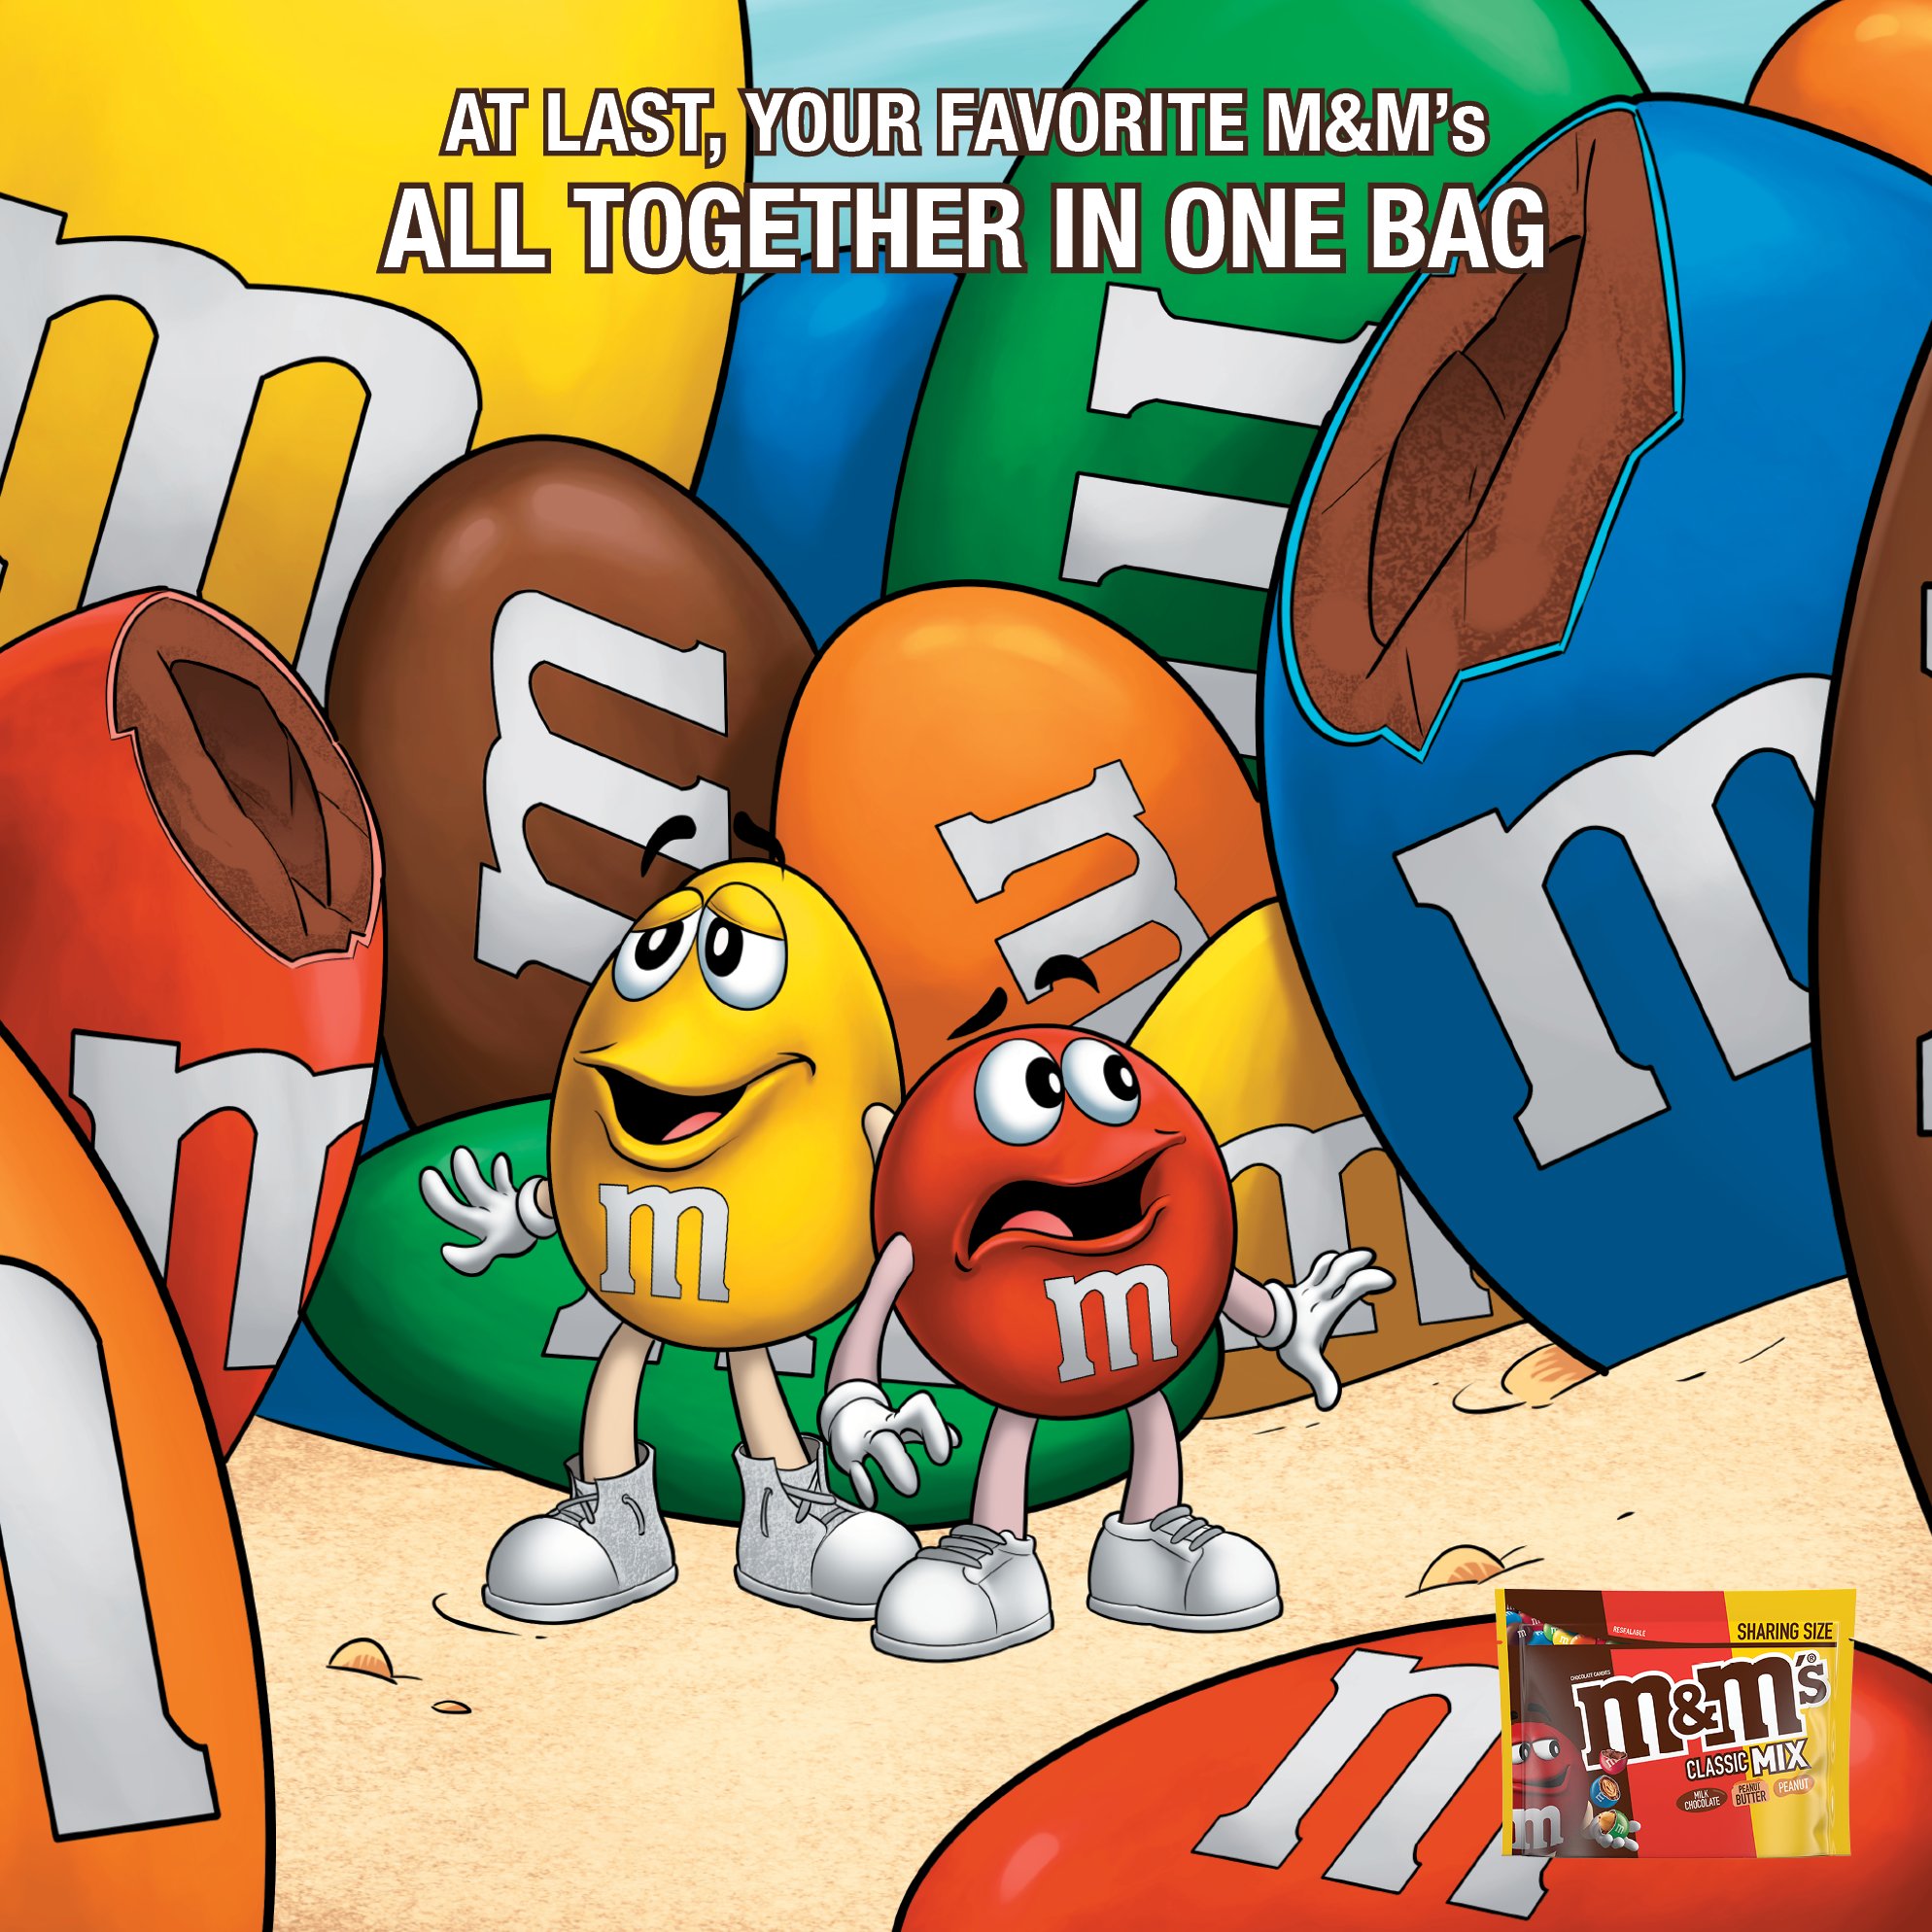 Marvel Entertainment on X: New M&M'S® MIX. At last, all